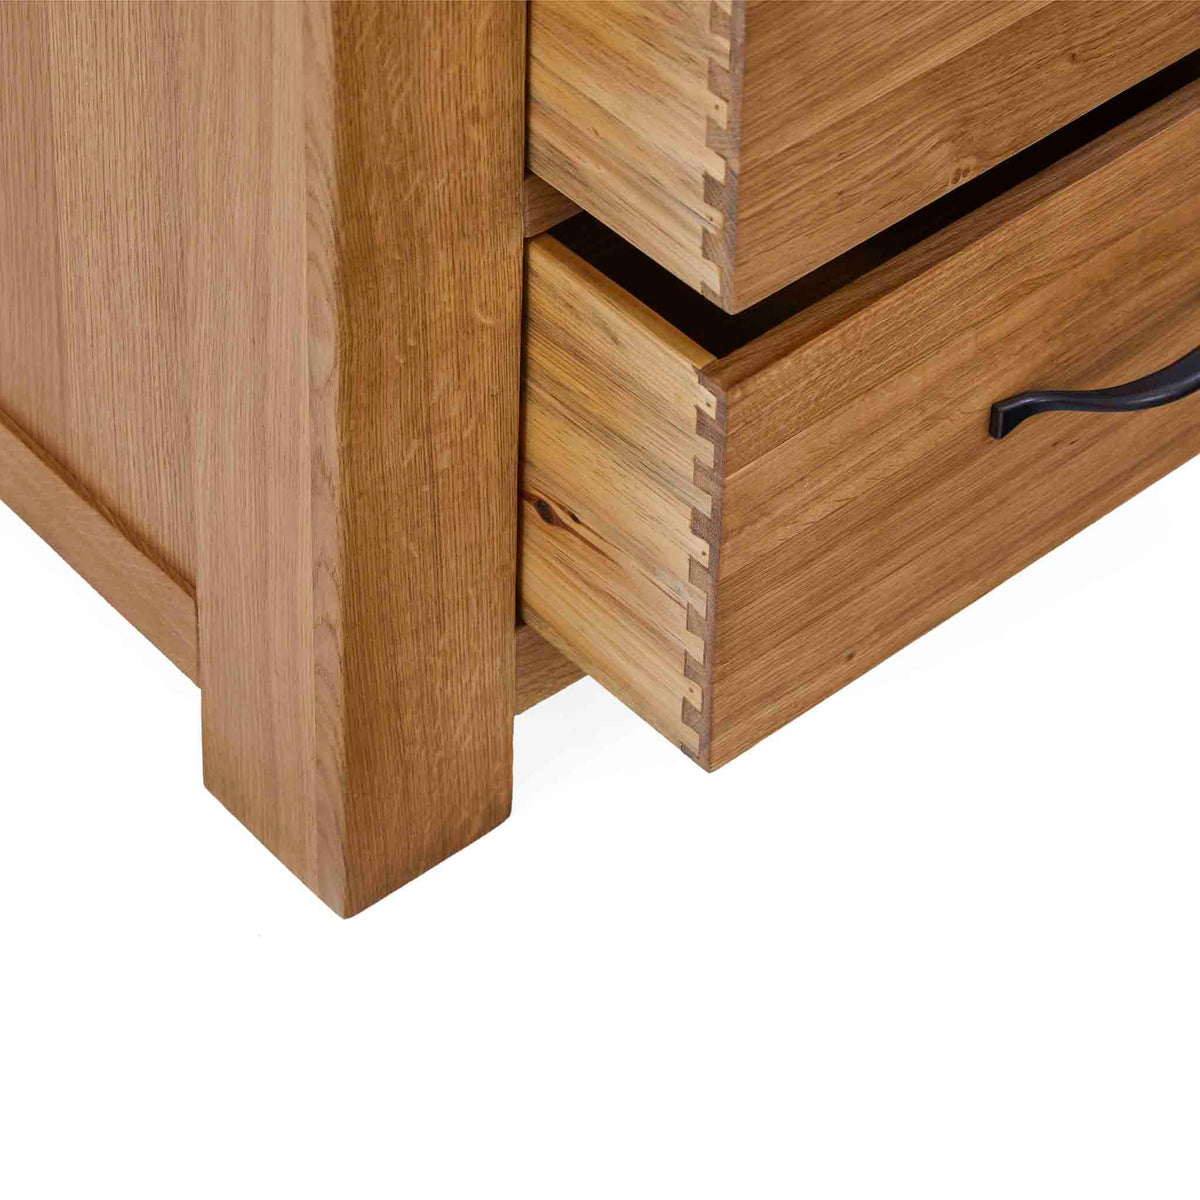 Abbey Grande Tallboy Chest of 5 Drawers - Showing base and lower drawers of tallboy